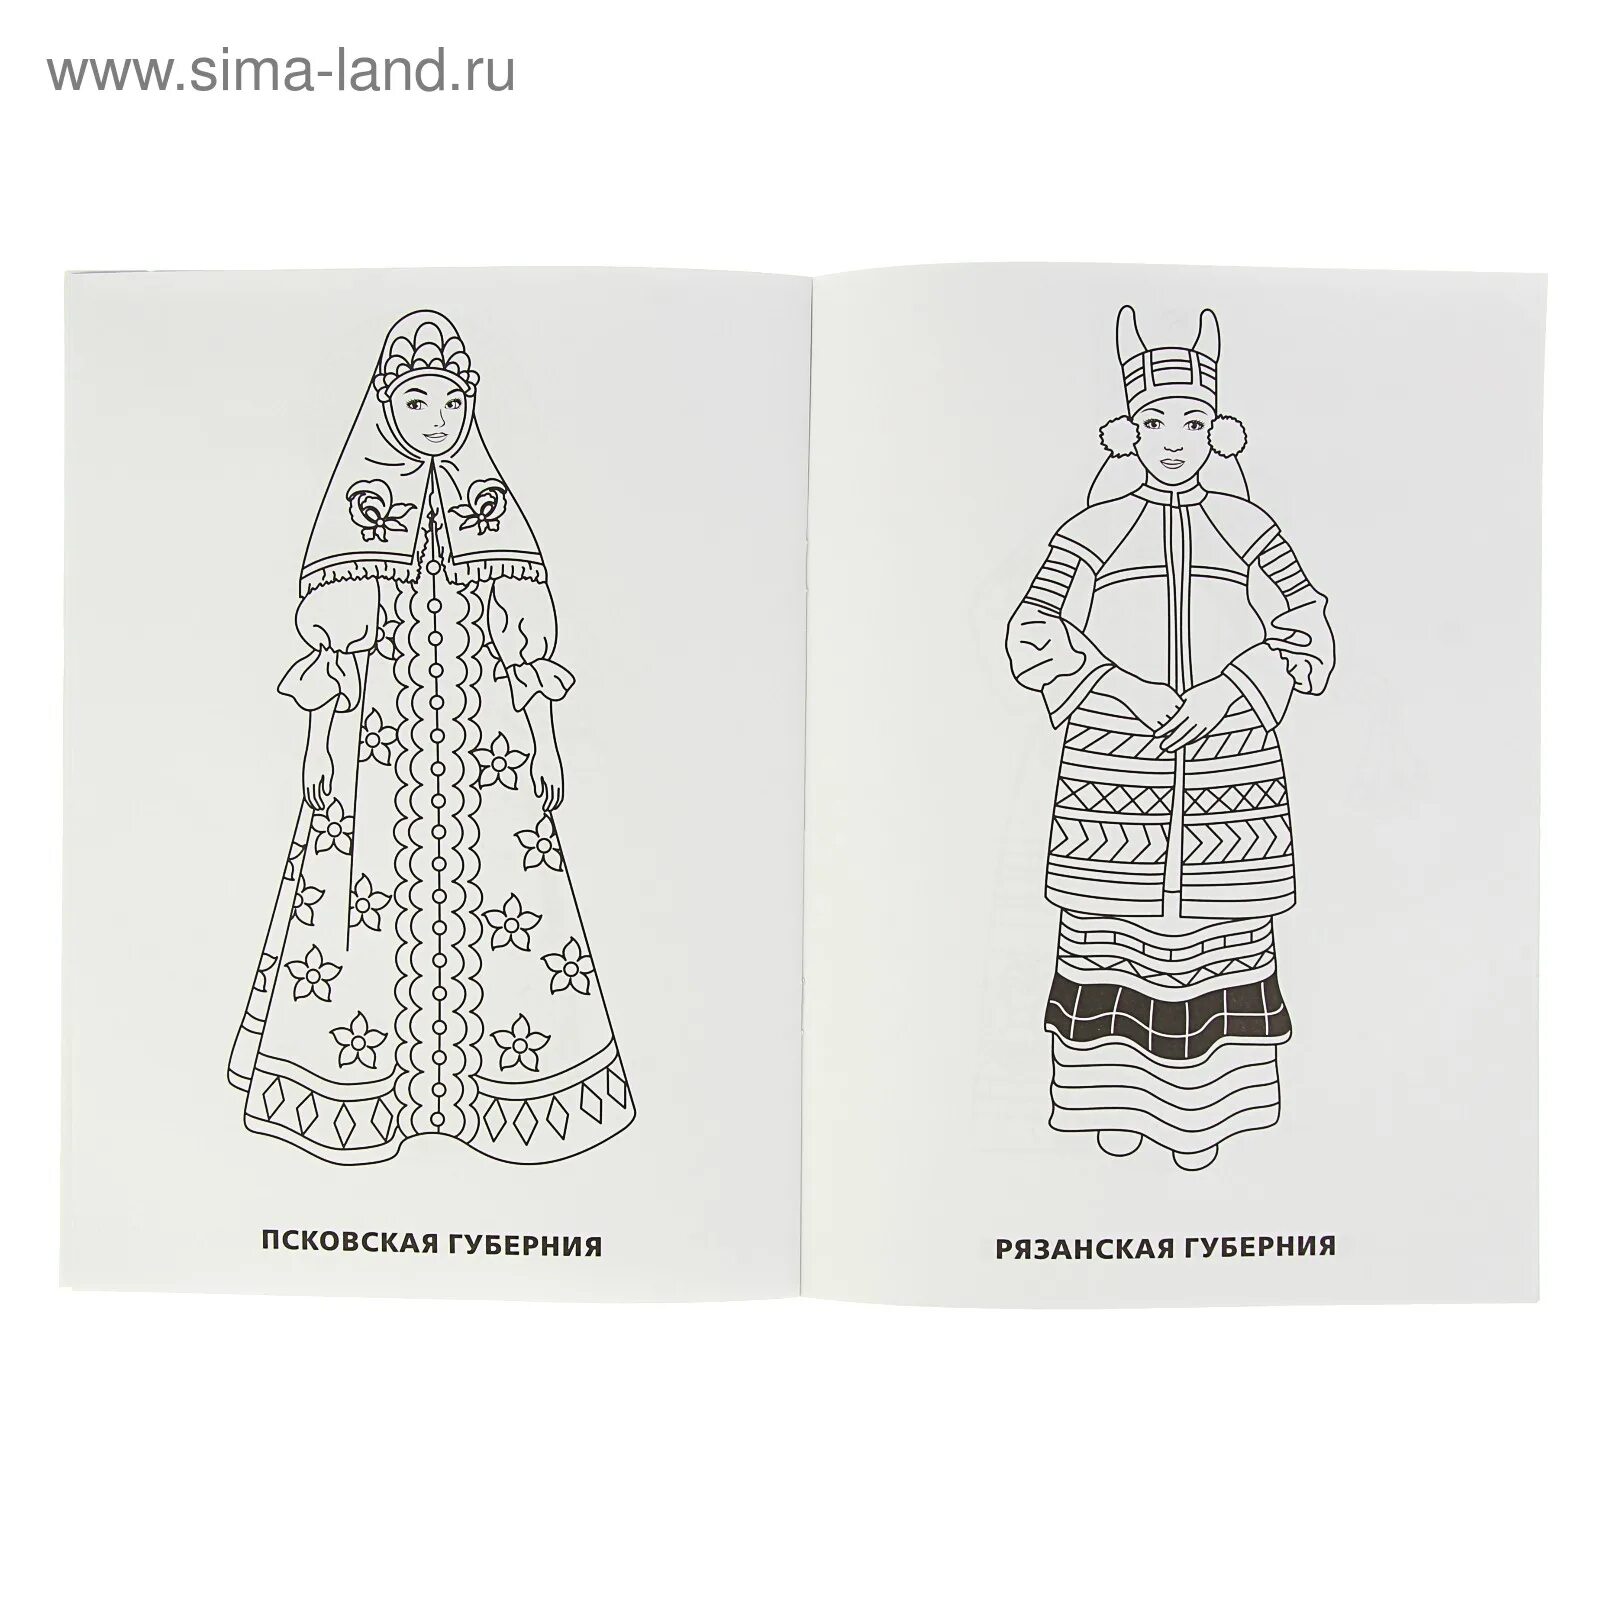 Traditional Russian costume #1